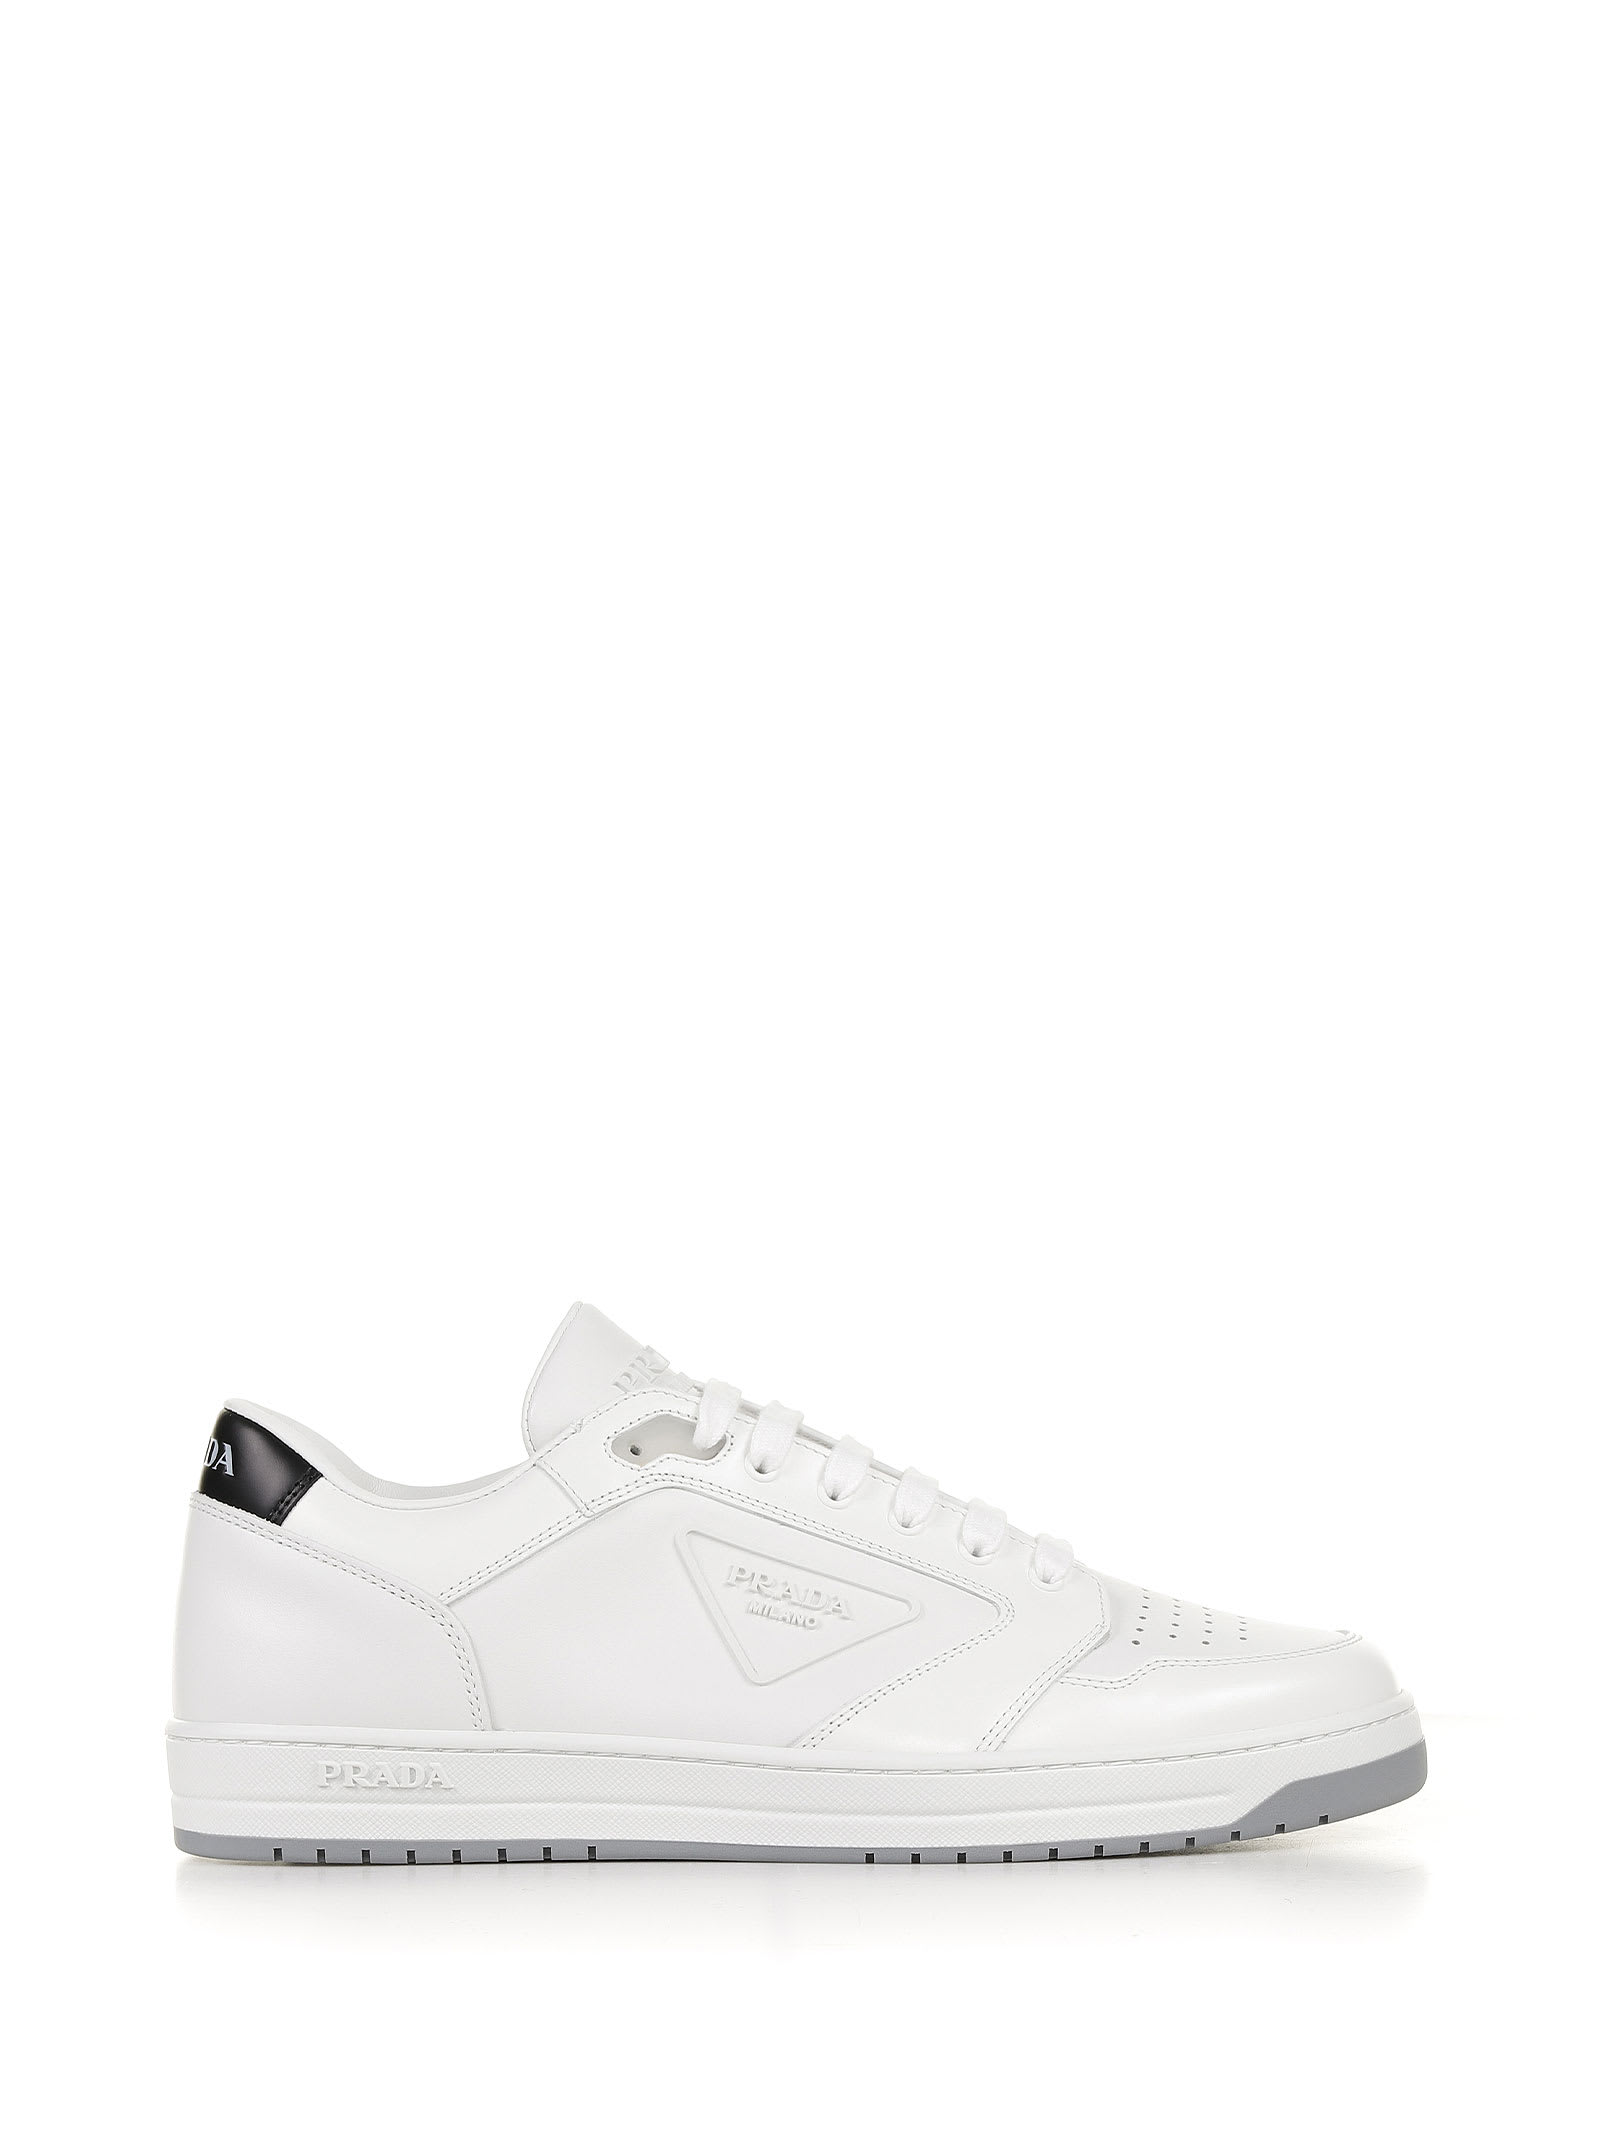 Prada District Leather Sneakers